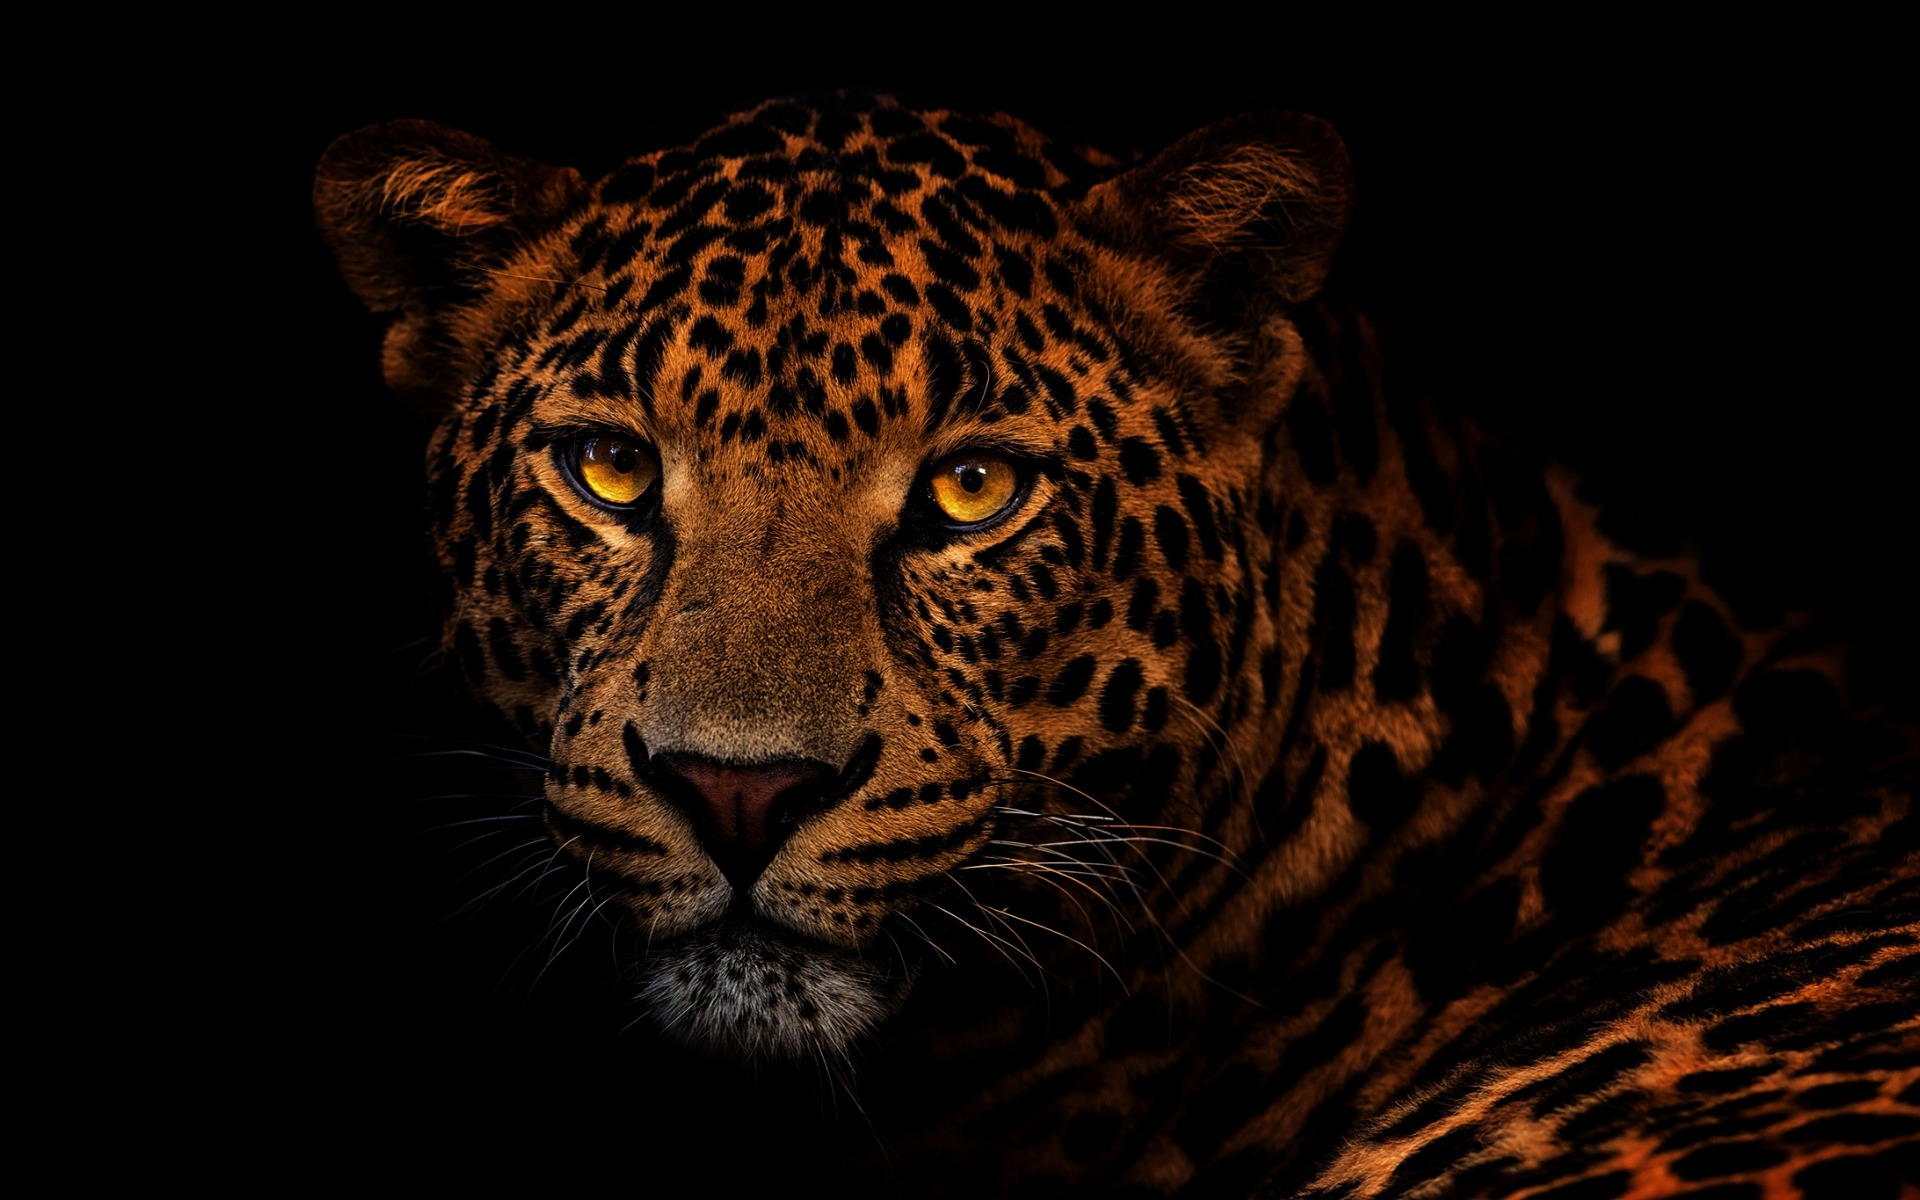 Download wallpaper leopard, wild cat, dangerous animals, leopard on a black background for desktop with resolution 1920x1200. High Quality HD picture wallpaper